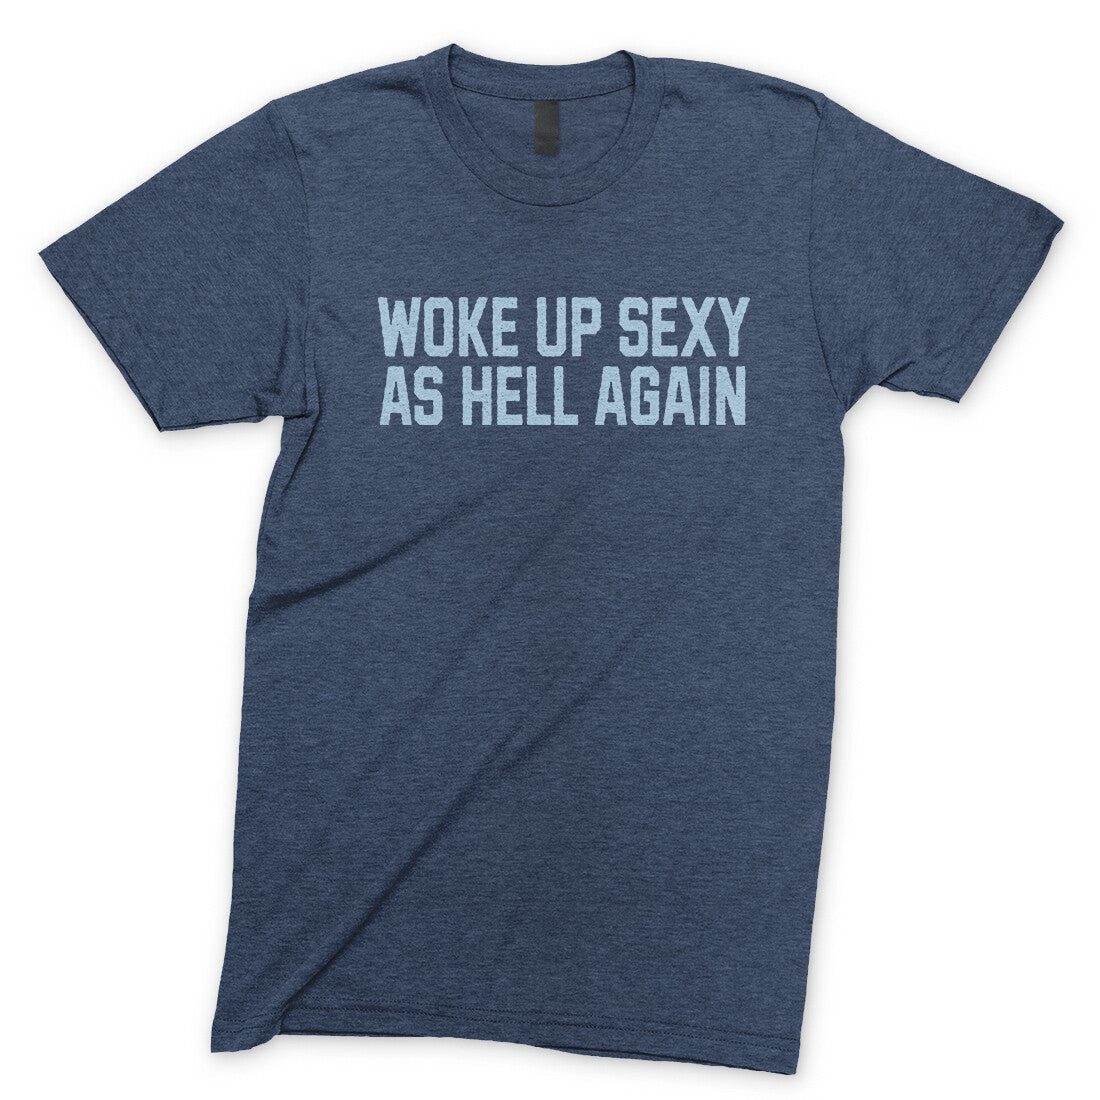 Woke Up Sexy as Hell in Navy Heather Color